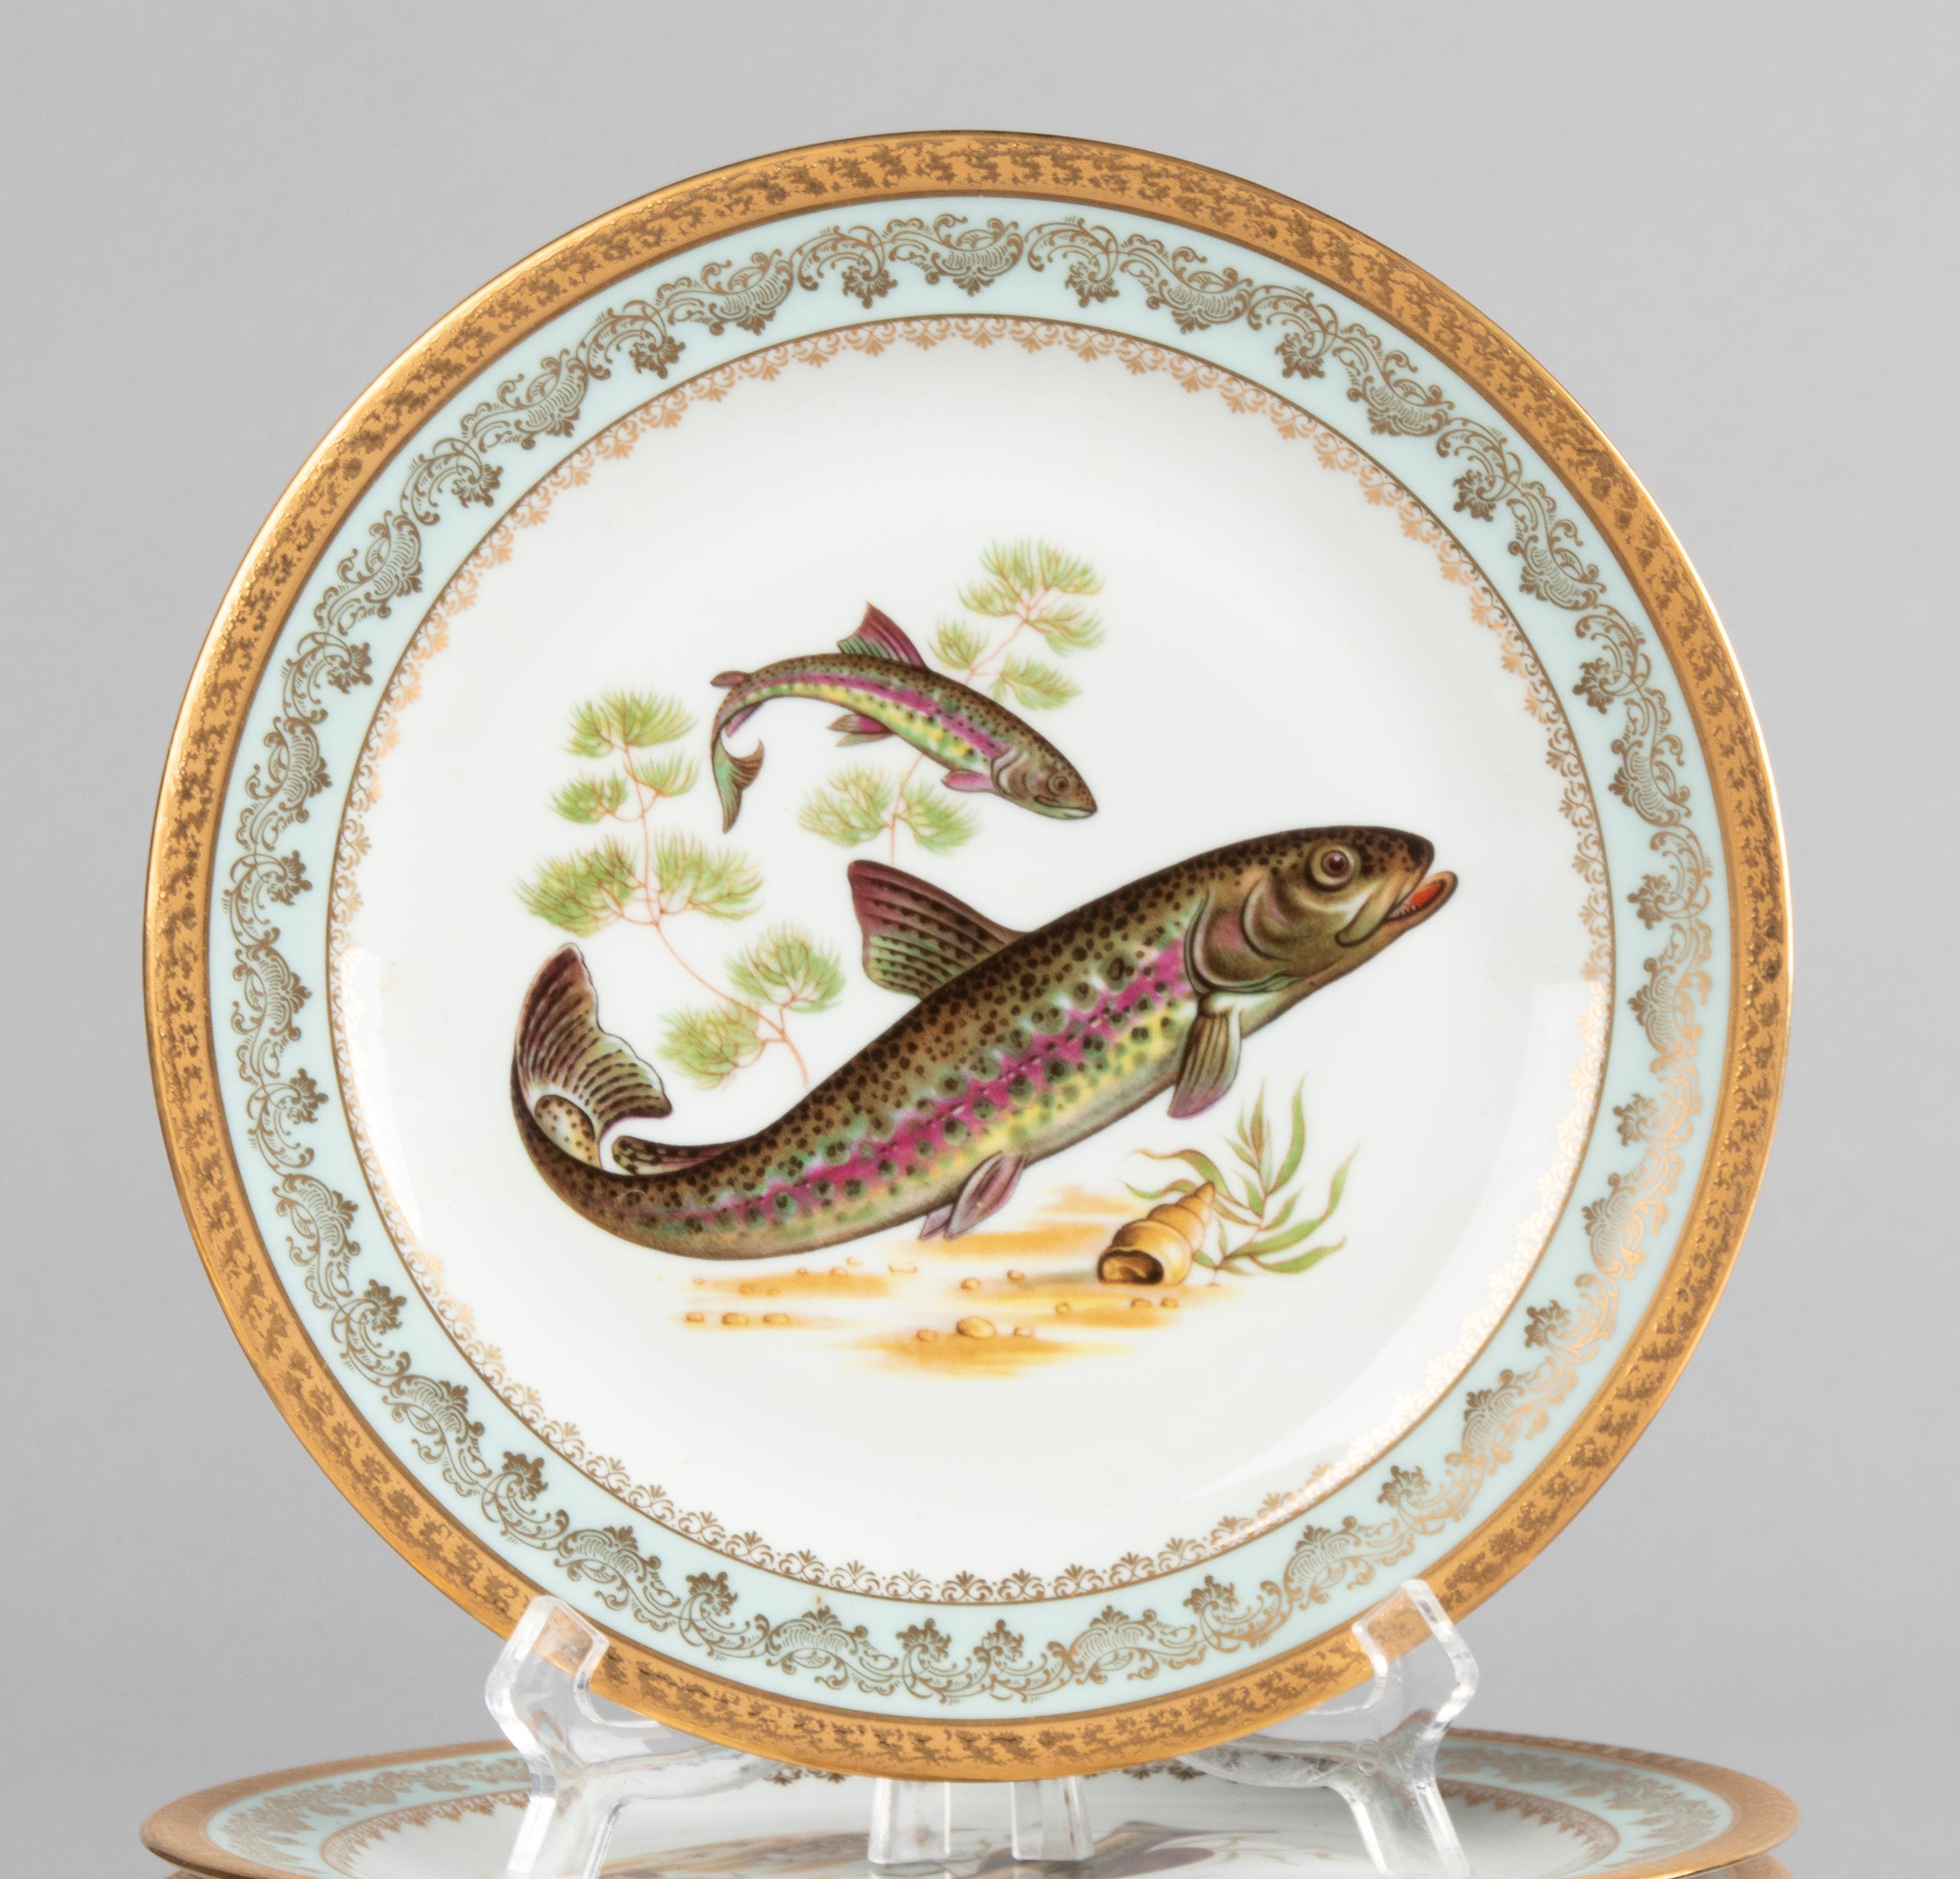 French Porcelain Fish Service by Limoges Chadelaud with Gilt Encrusted Rims